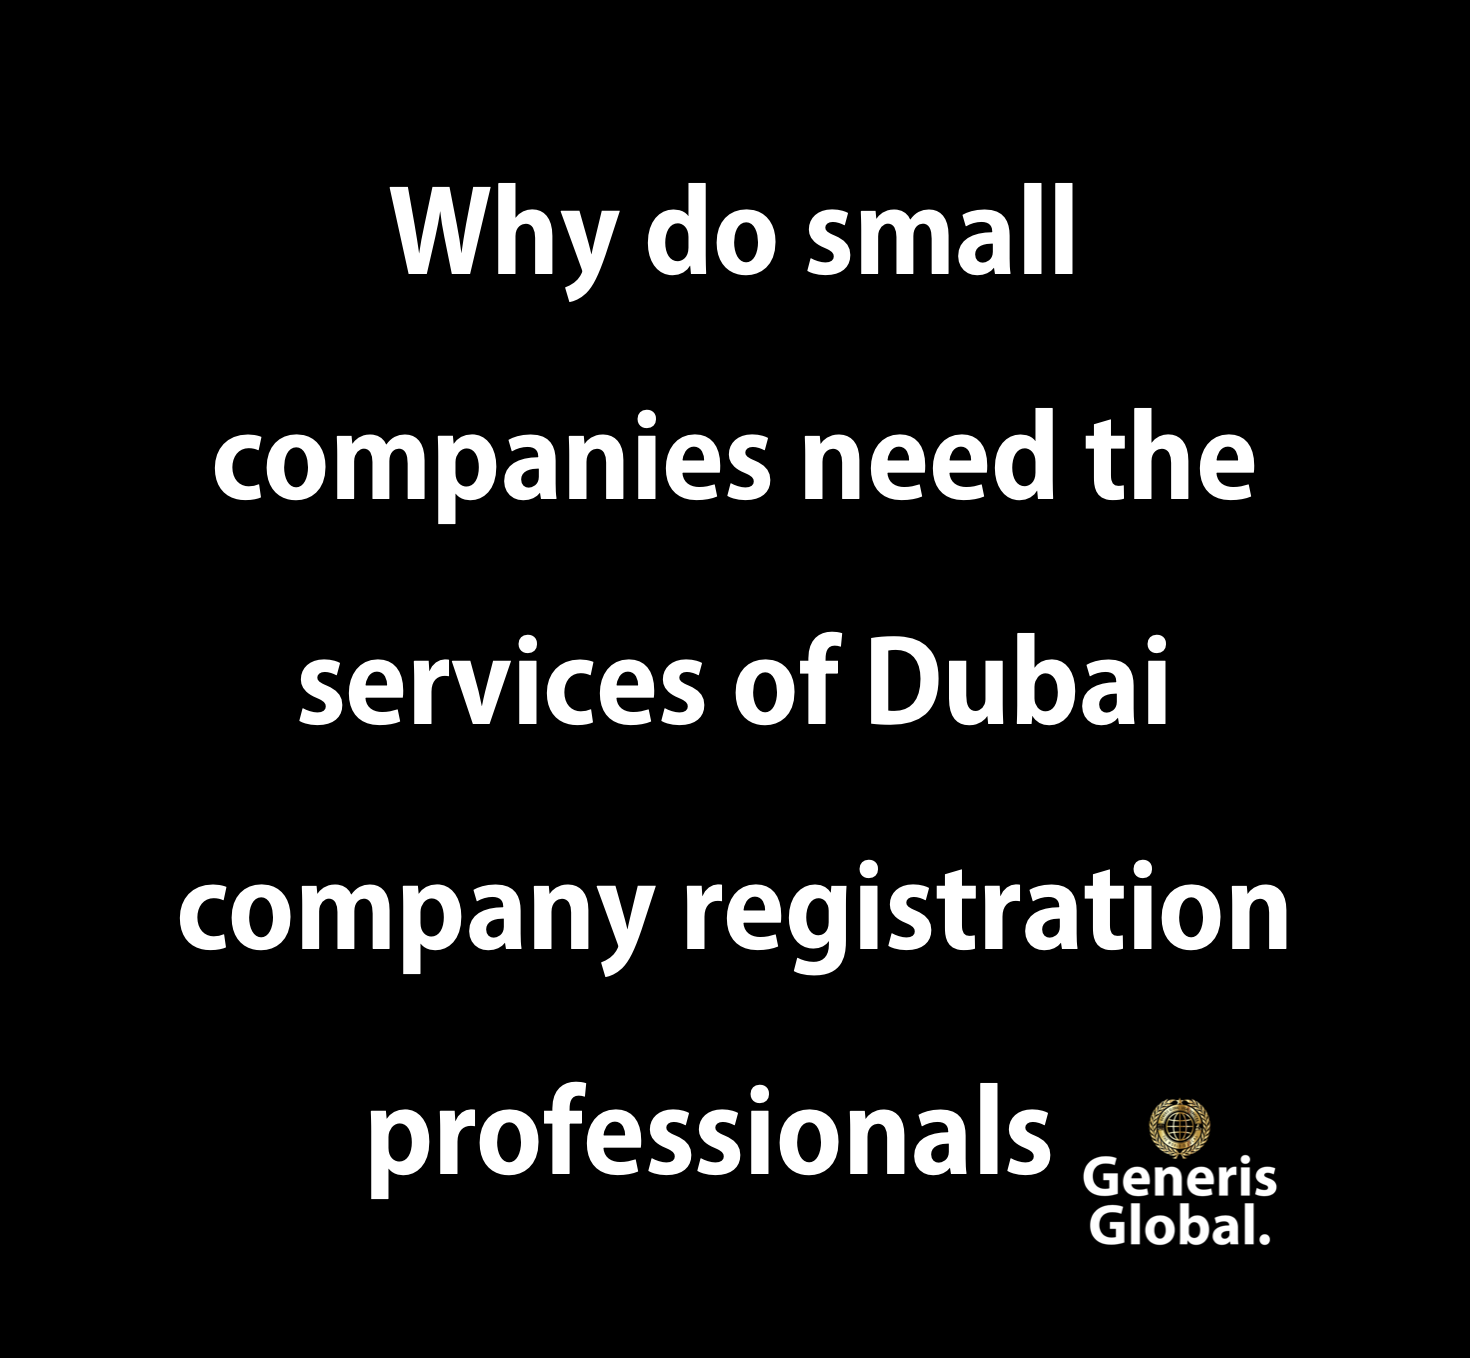 Why do small companies need the services of Dubai company registration professionals?